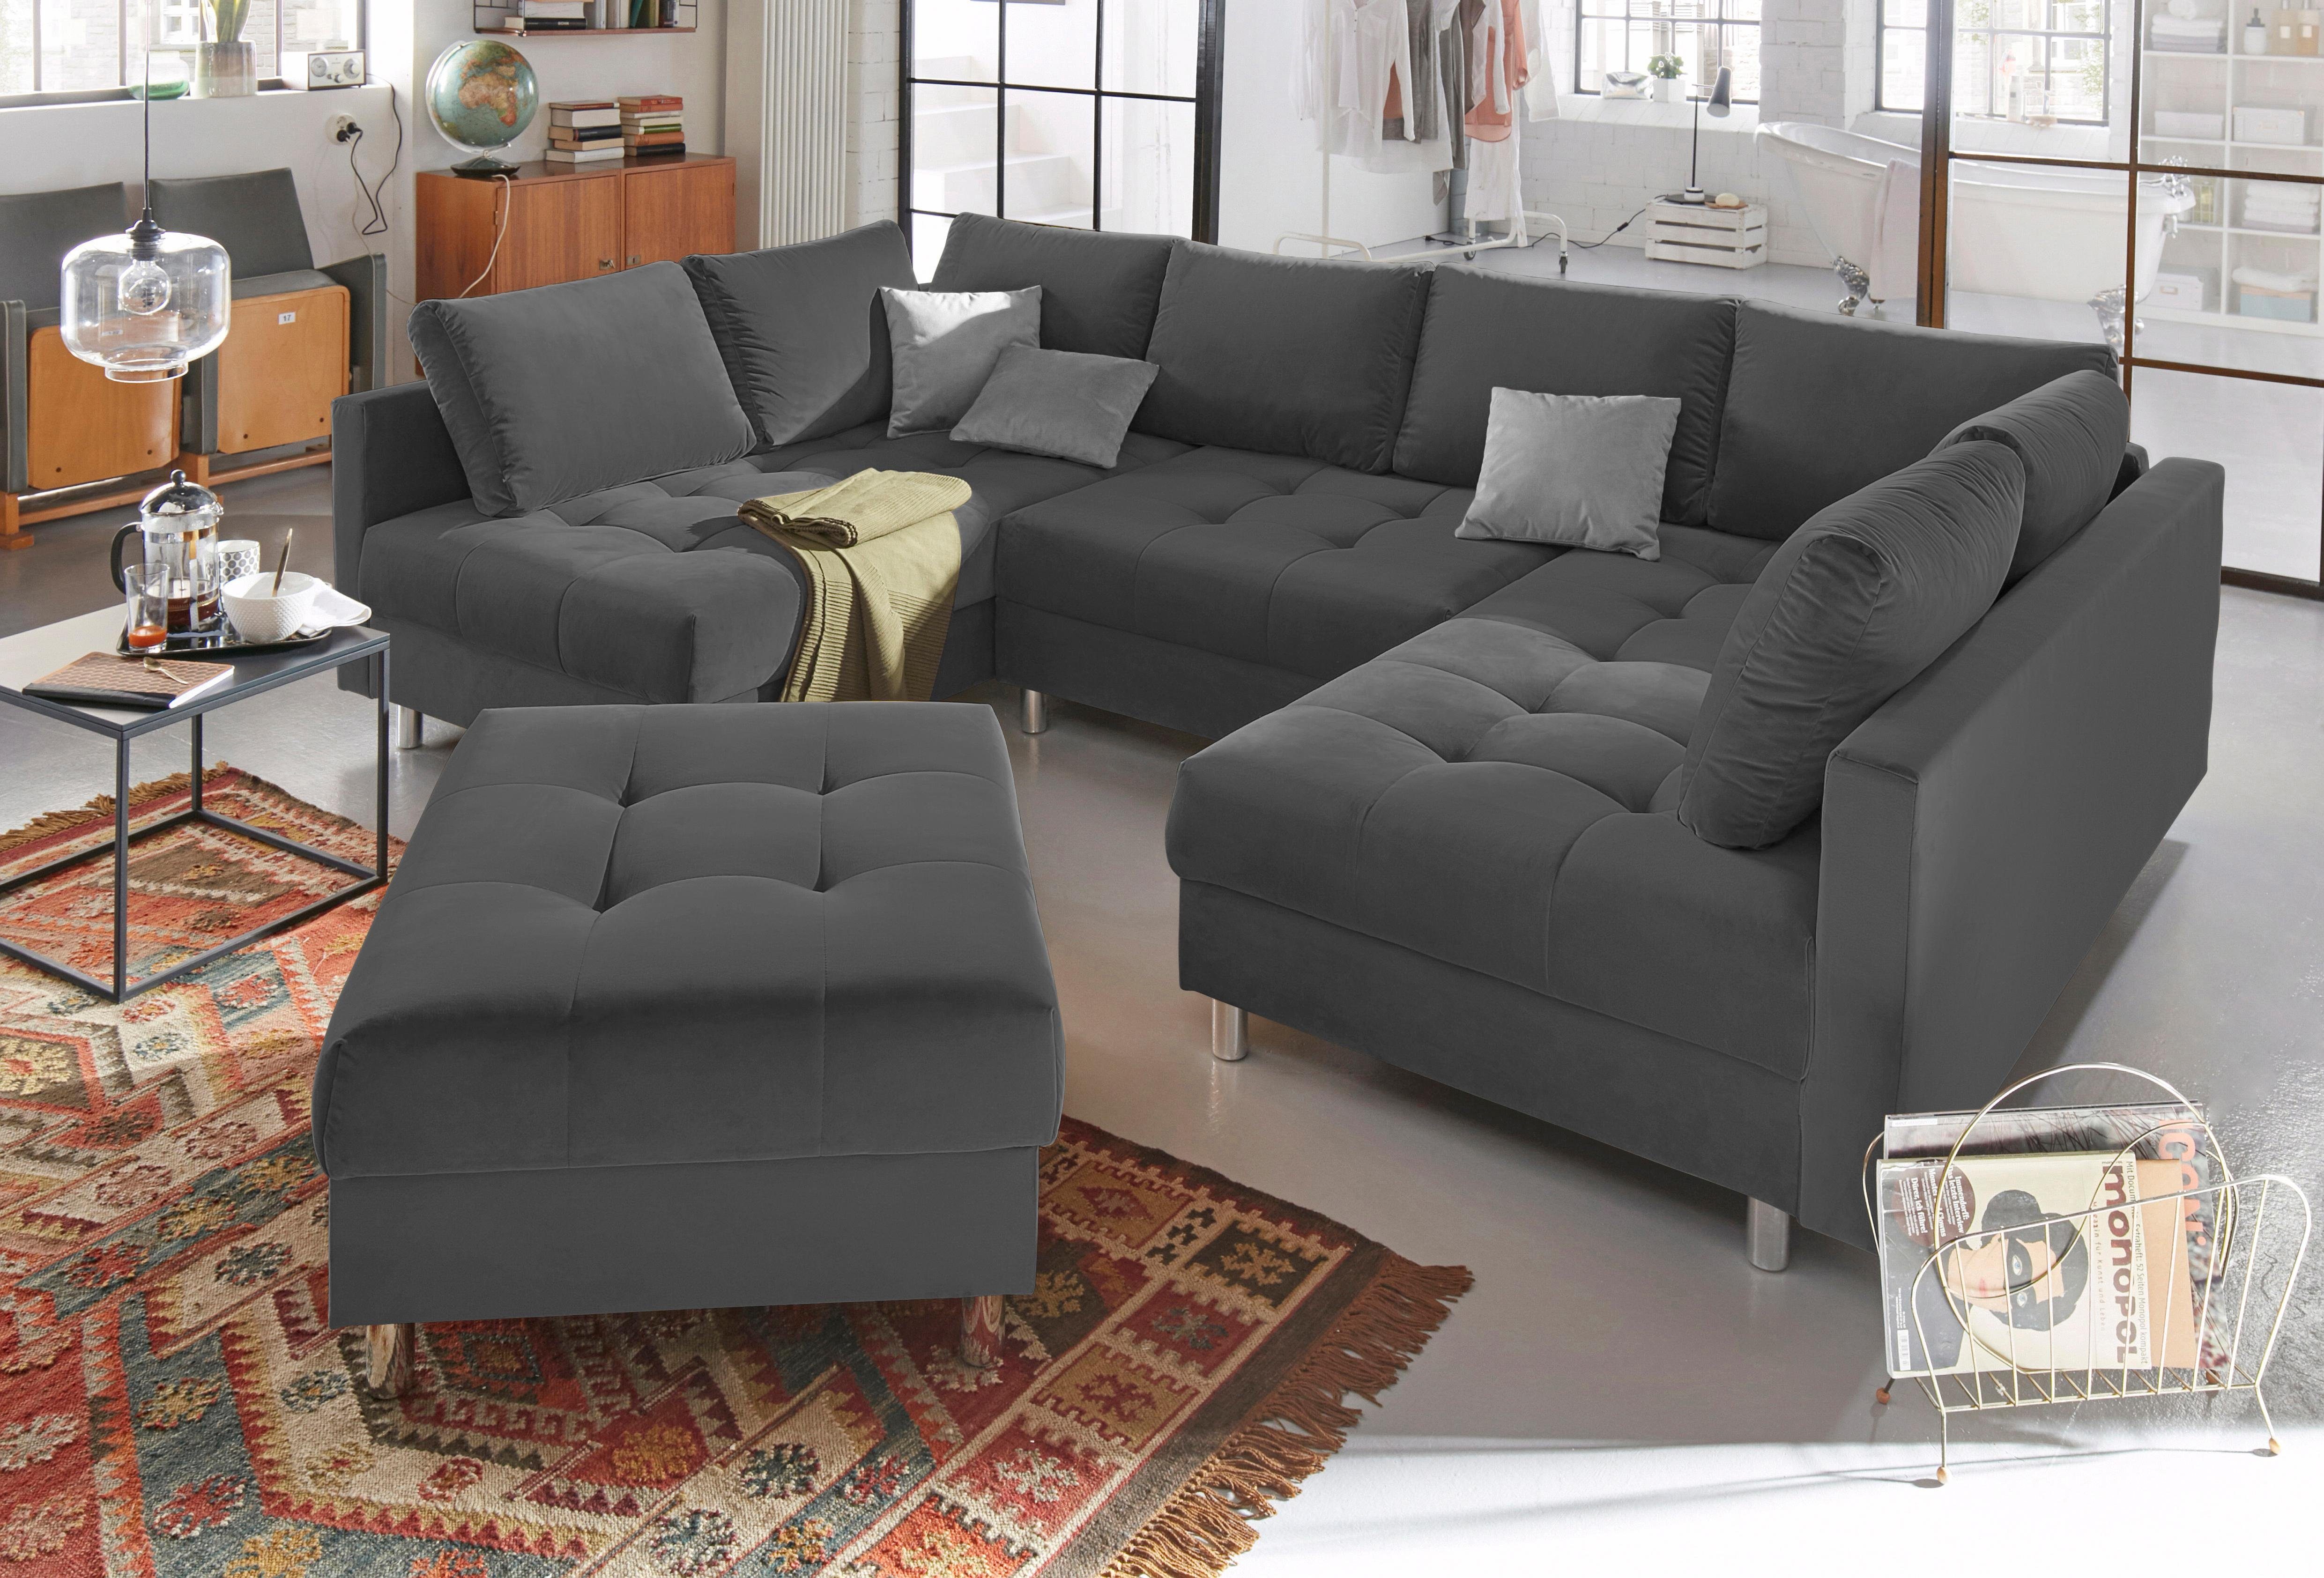 Collection Ab COLLECTION AB zithoek, inclusief hocker